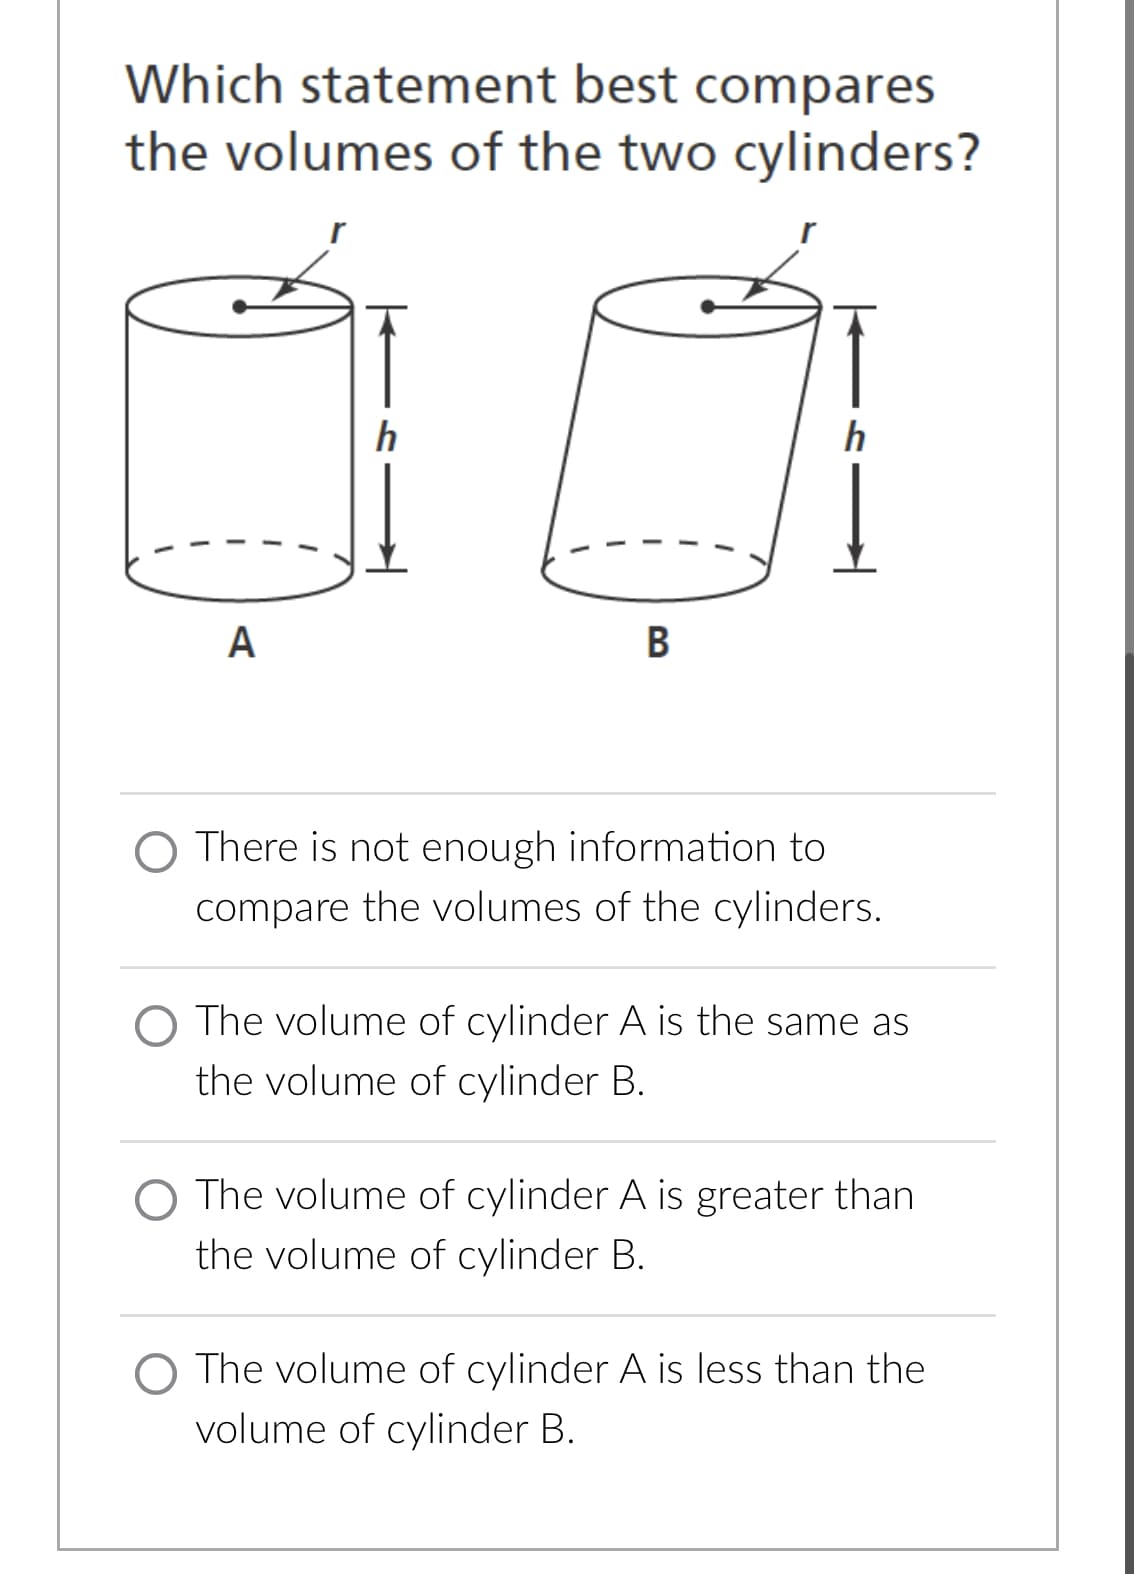 Which statement best compares
the volumes of the two cylinders?
1
A
h
B
O There is not enough information to
compare the volumes of the cylinders.
The volume of cylinder A is the same as
the volume of cylinder B.
The volume of cylinder A is greater than
the volume of cylinder B.
O The volume of cylinder A is less than the
volume of cylinder B.